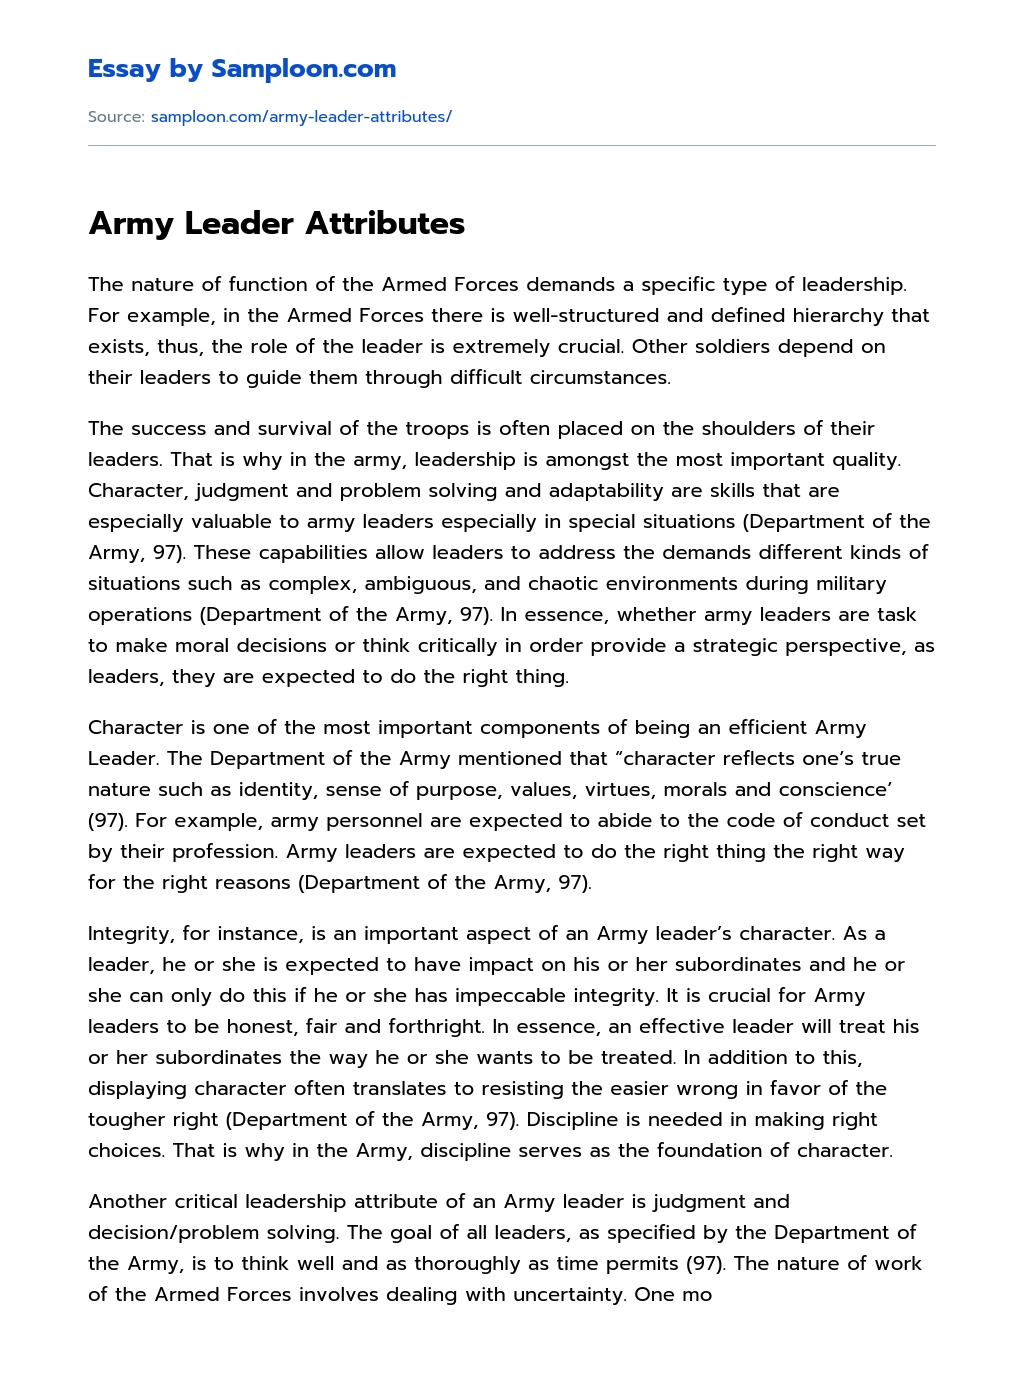 army blc compare and contrast essay